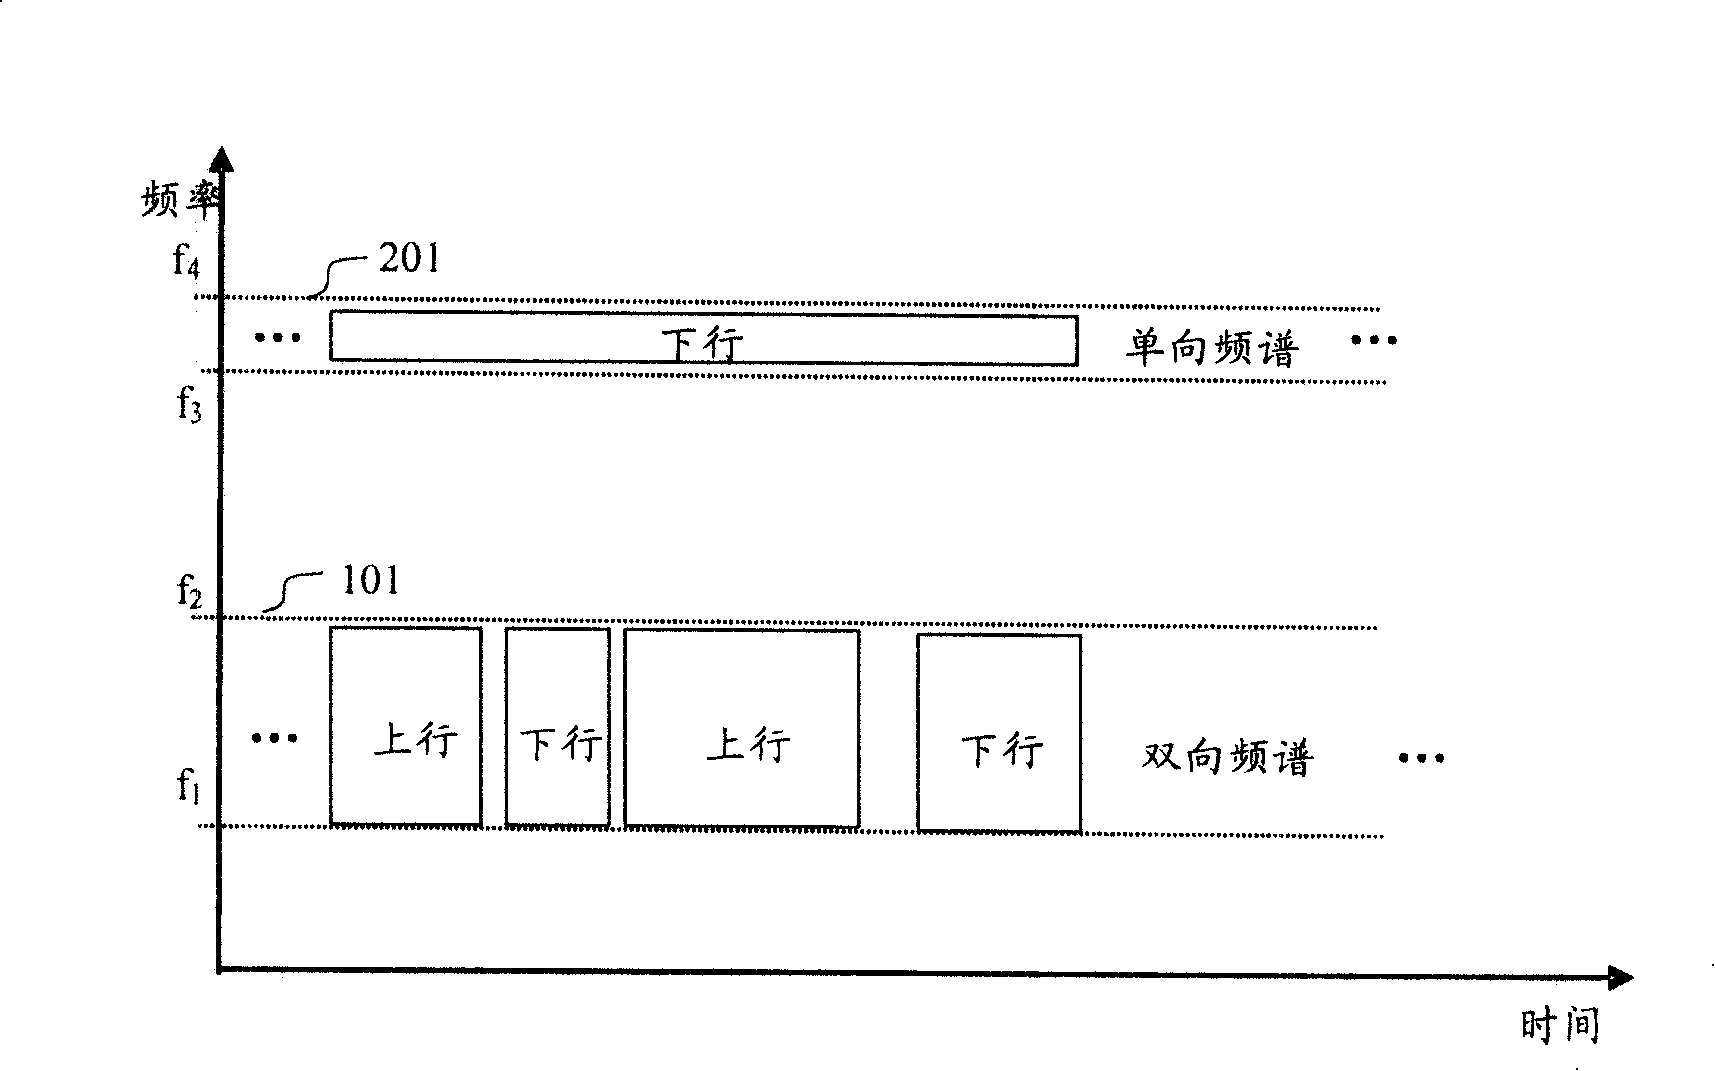 Method for base station to transmit feedback signals to the terminal in time division duplex system